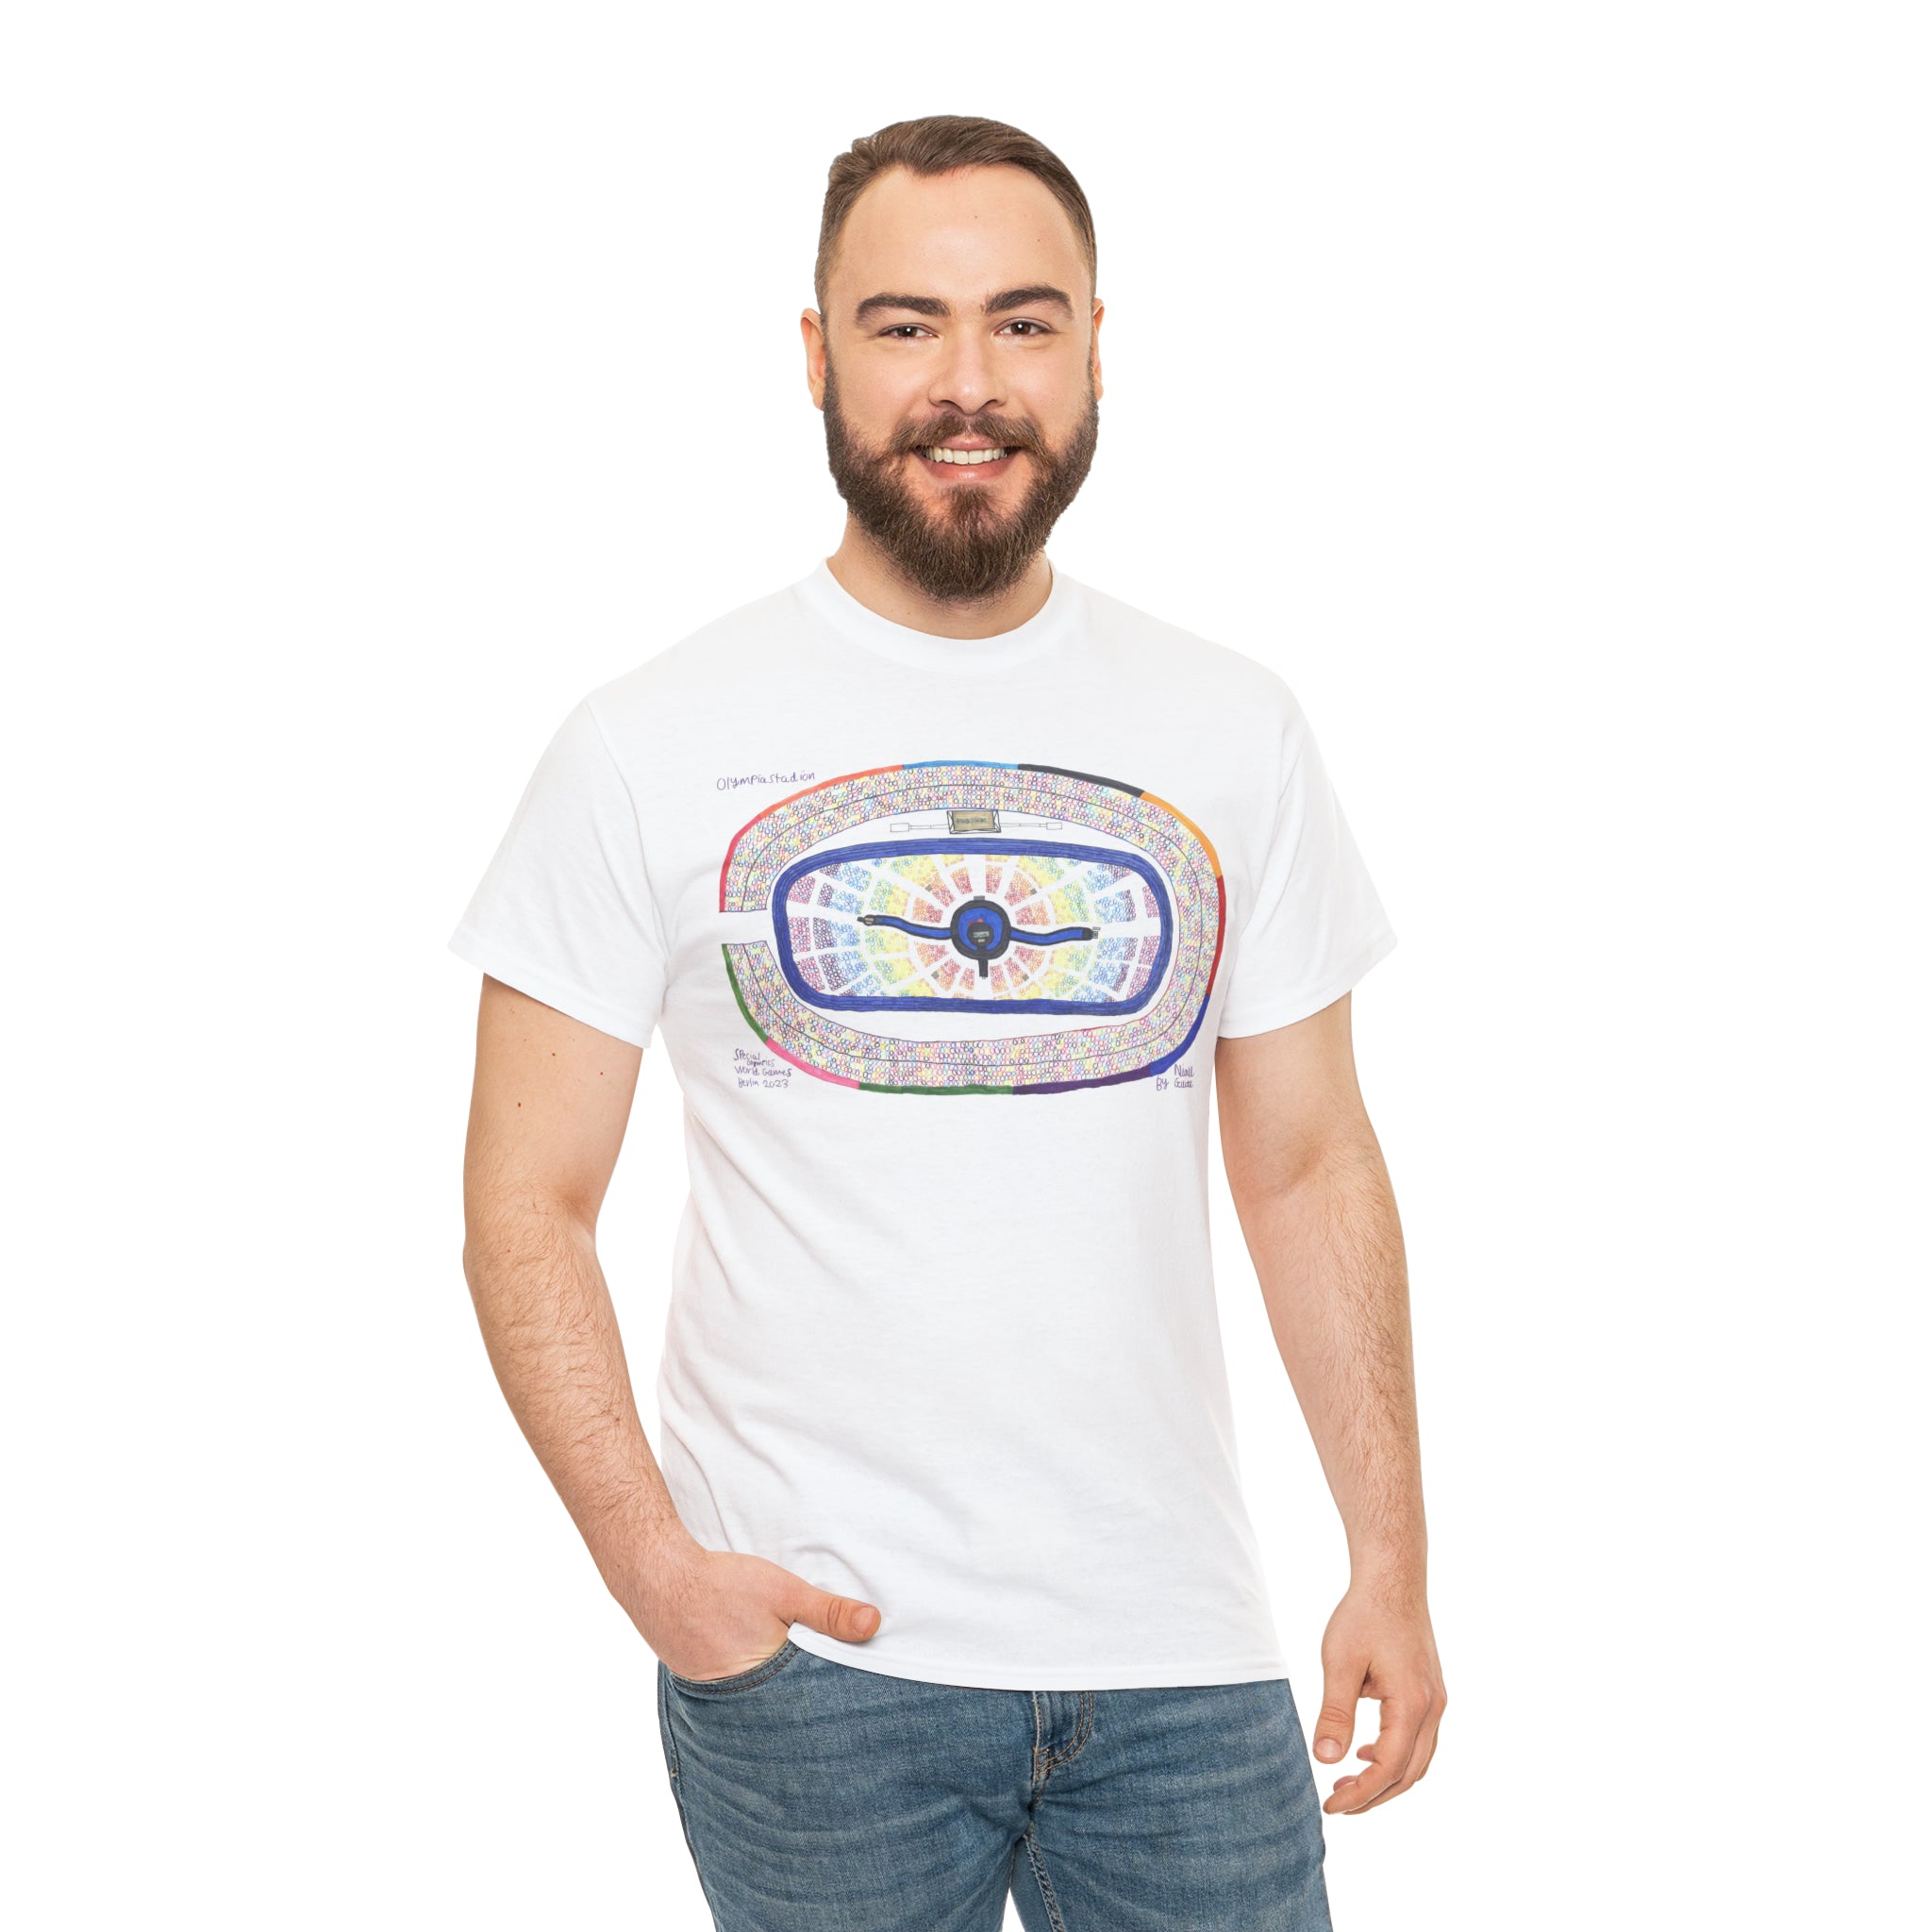 Special Olympics World Summer Games Opening Ceremony - Unisex Cotton T-Shirt